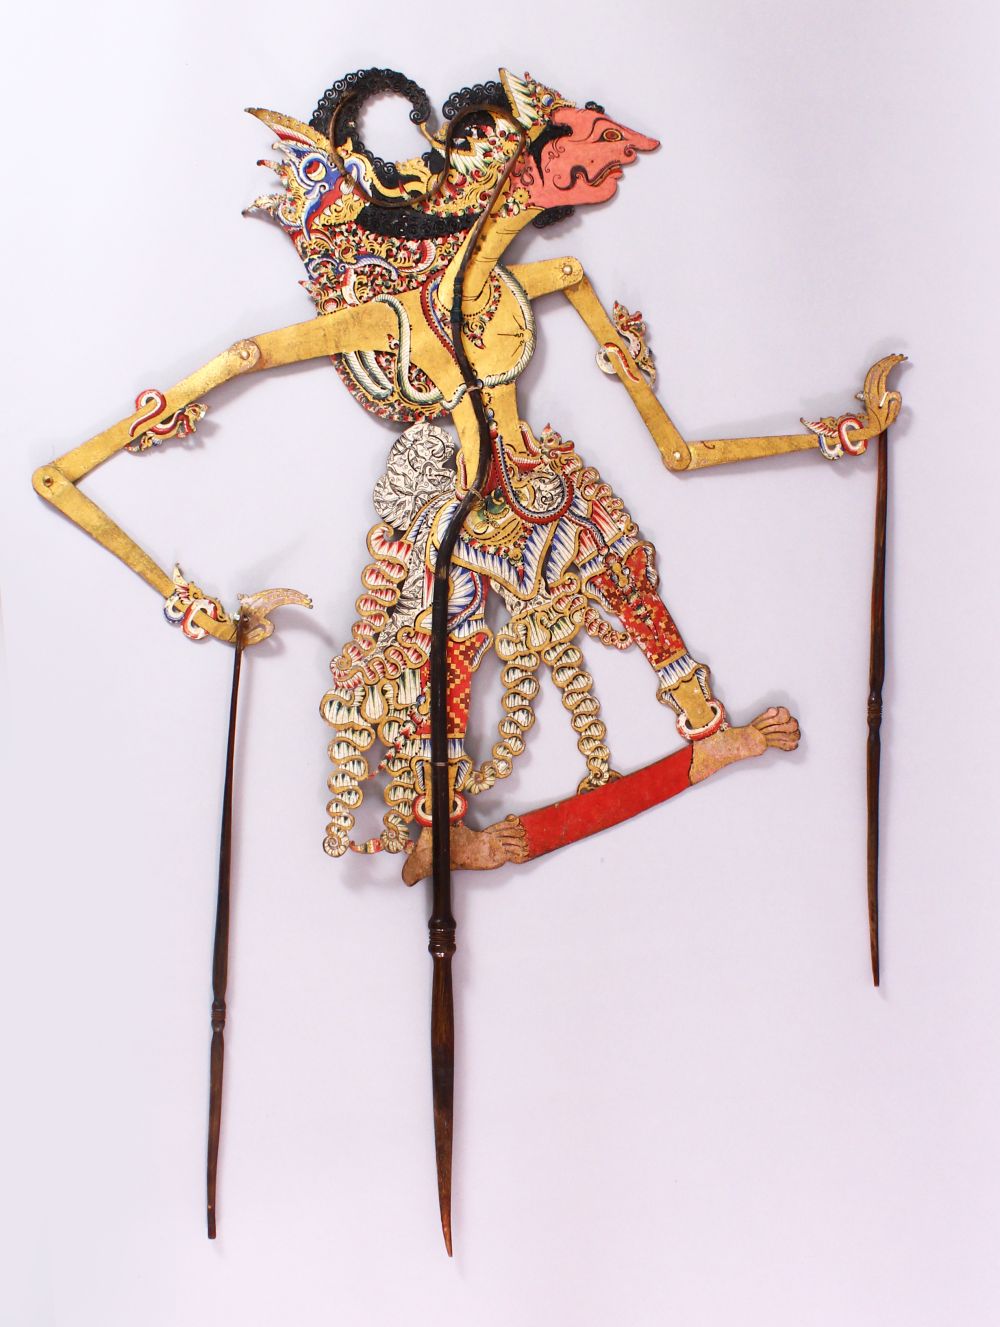 A LARGE 19TH CENTURY INDONESIAN SHADOW PUPPET WITH RHINO HORN STICKS, 73cm.